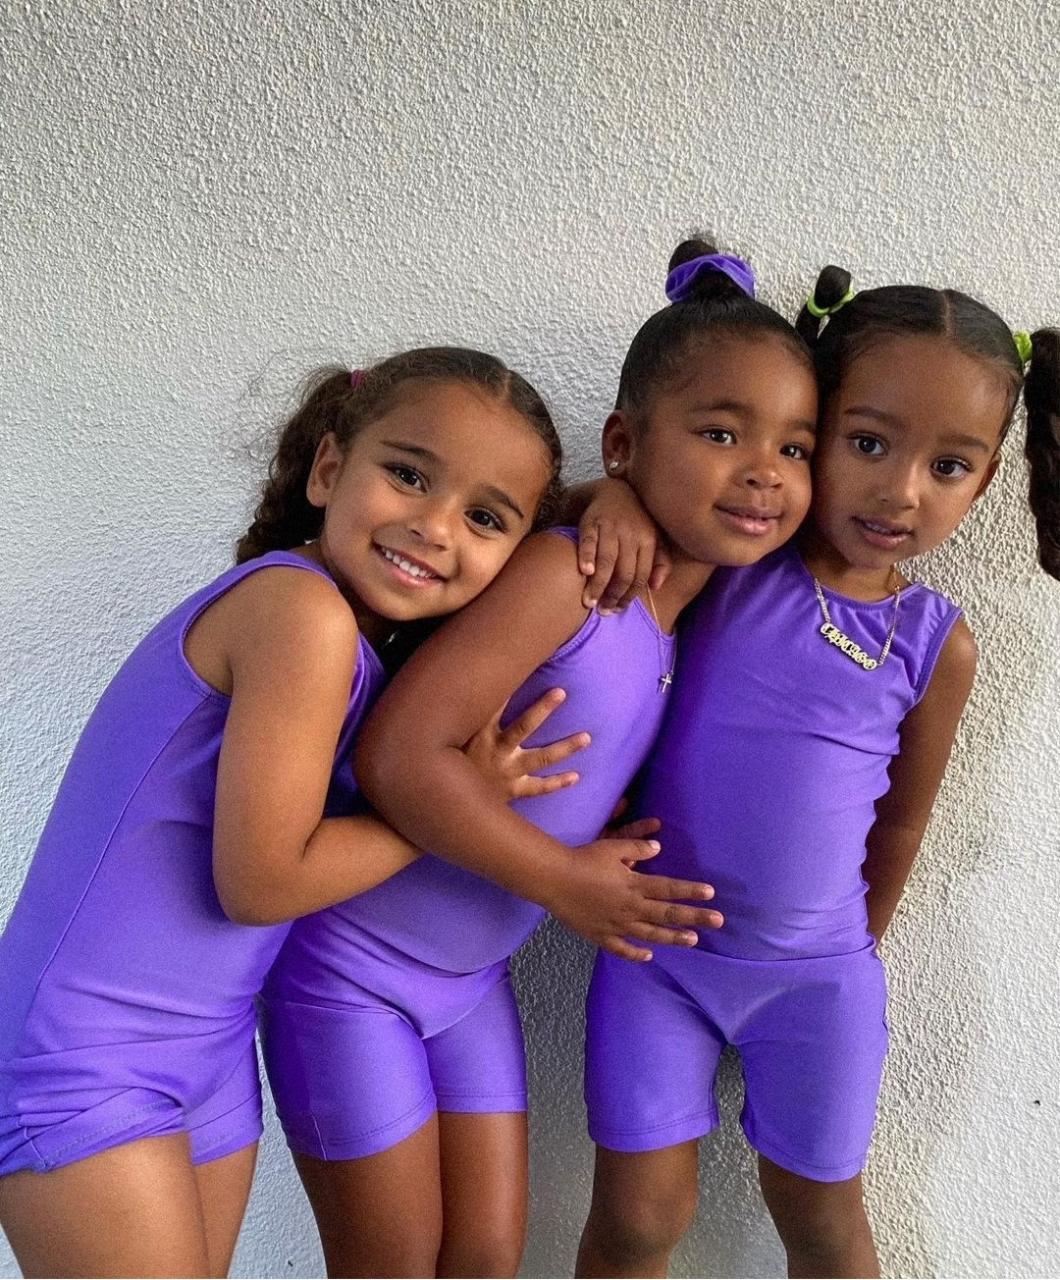 Khloe Kardashian shares adorable photos of her daughter True with cousins Dream and Chicago in matching purple leotards